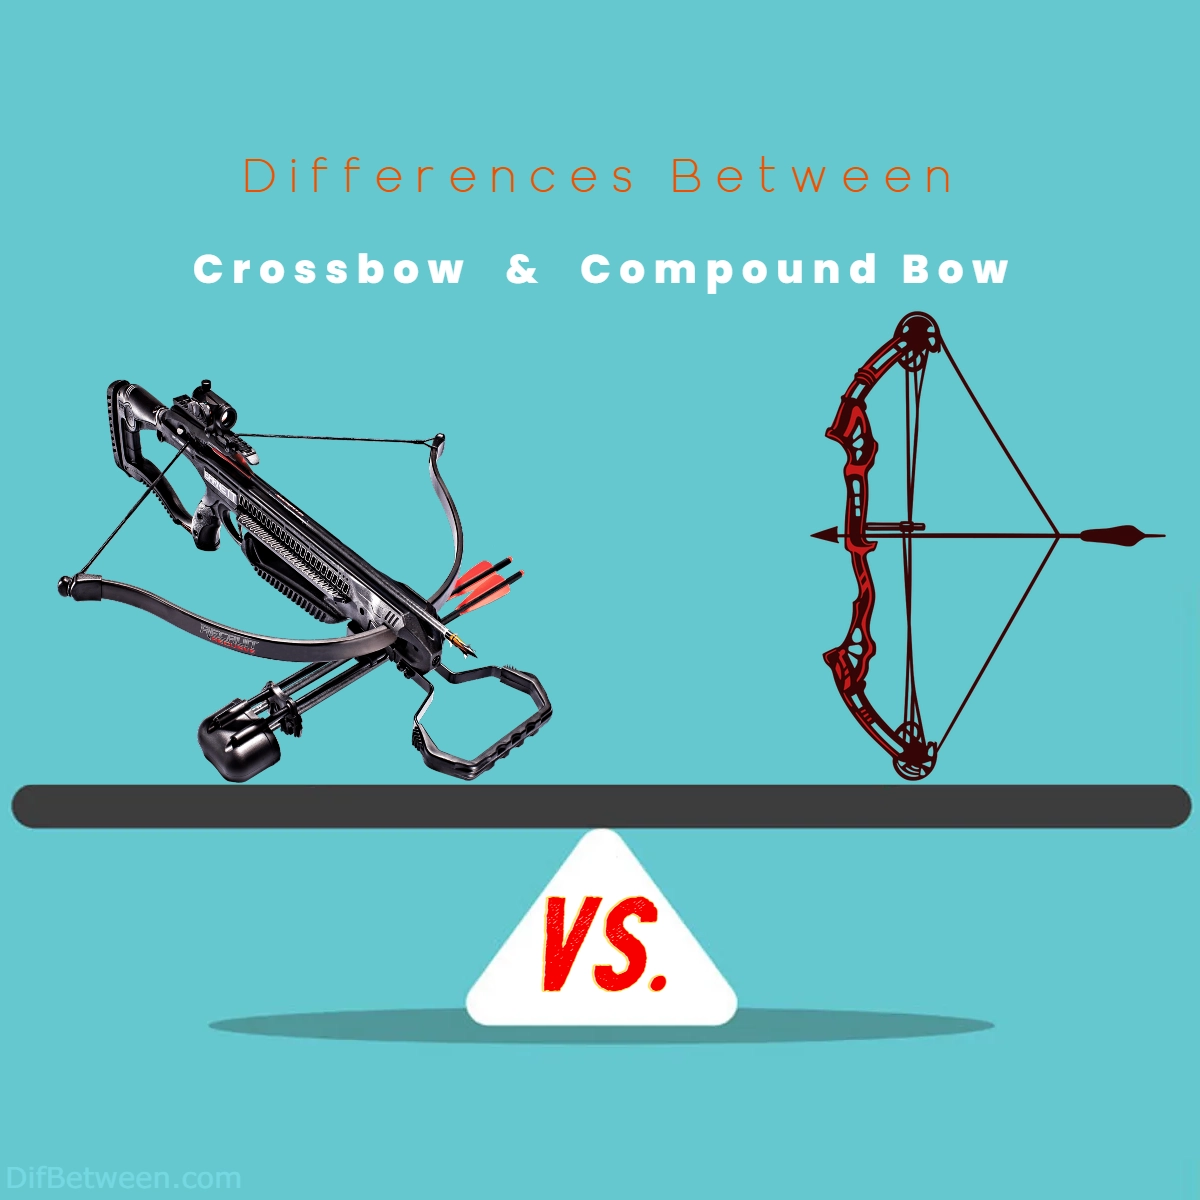 Difference Between Crossbow and Compound Bow